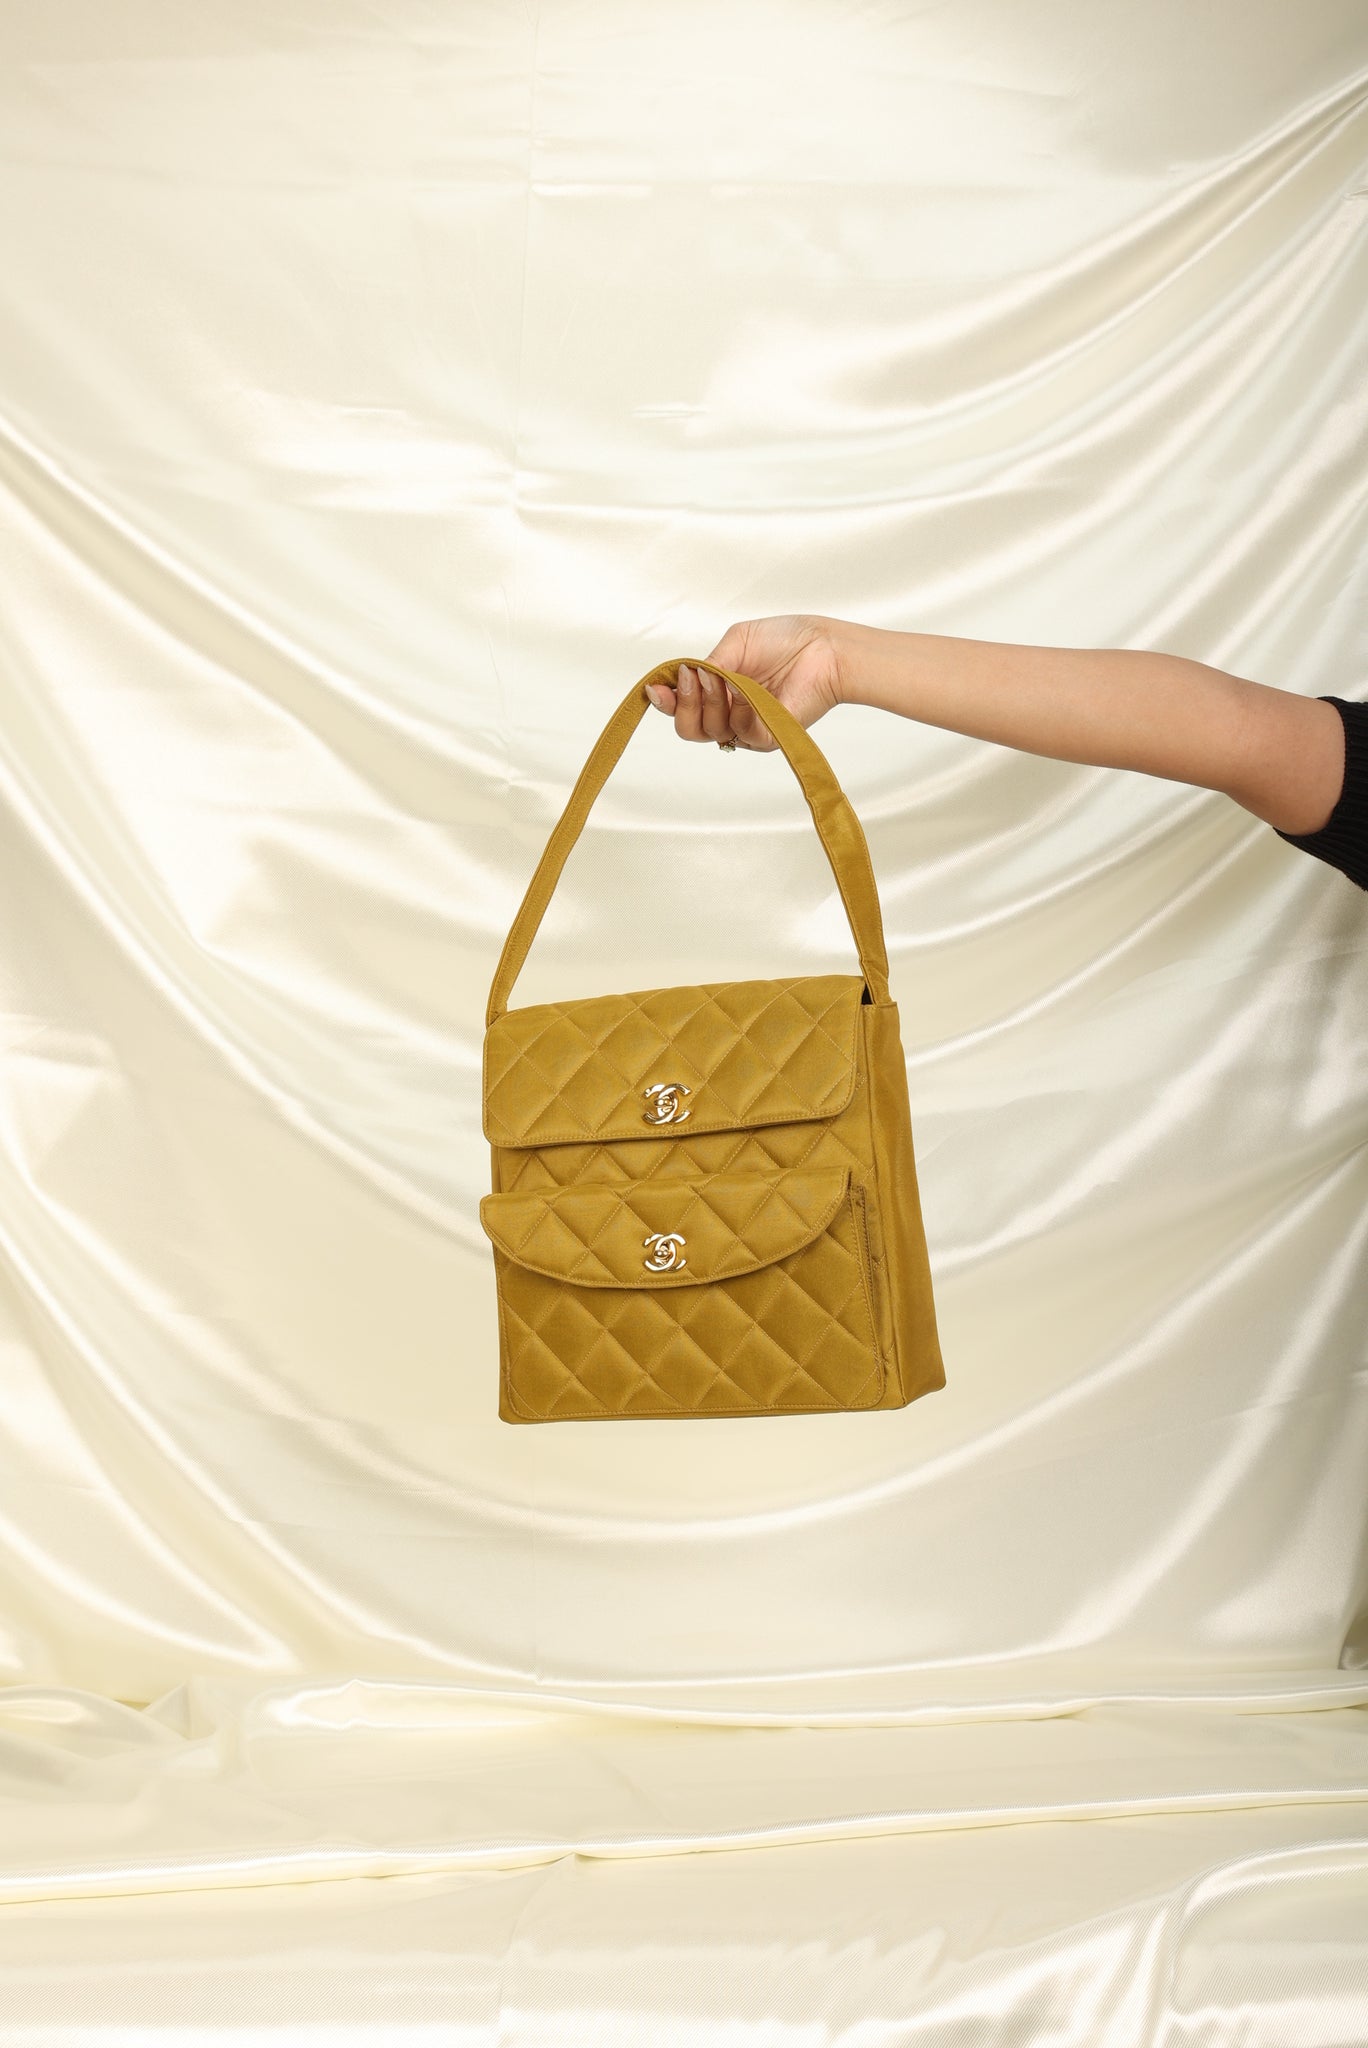 Extremely Rare Chanel Chartreuse Double Turnlock Bag